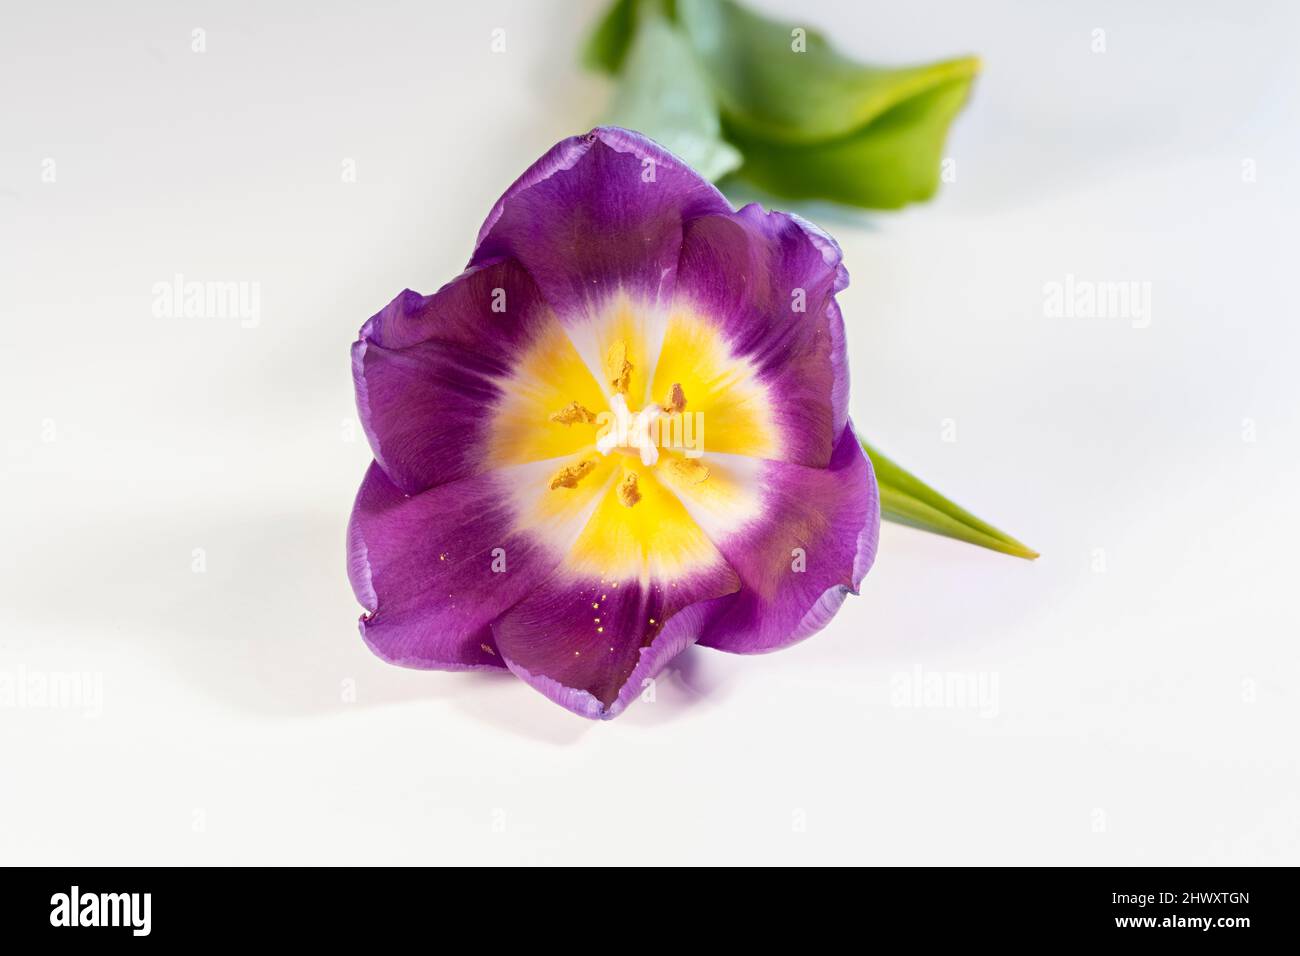 Gorgeous solitary purple Tulip photographed against a plain white background Stock Photo